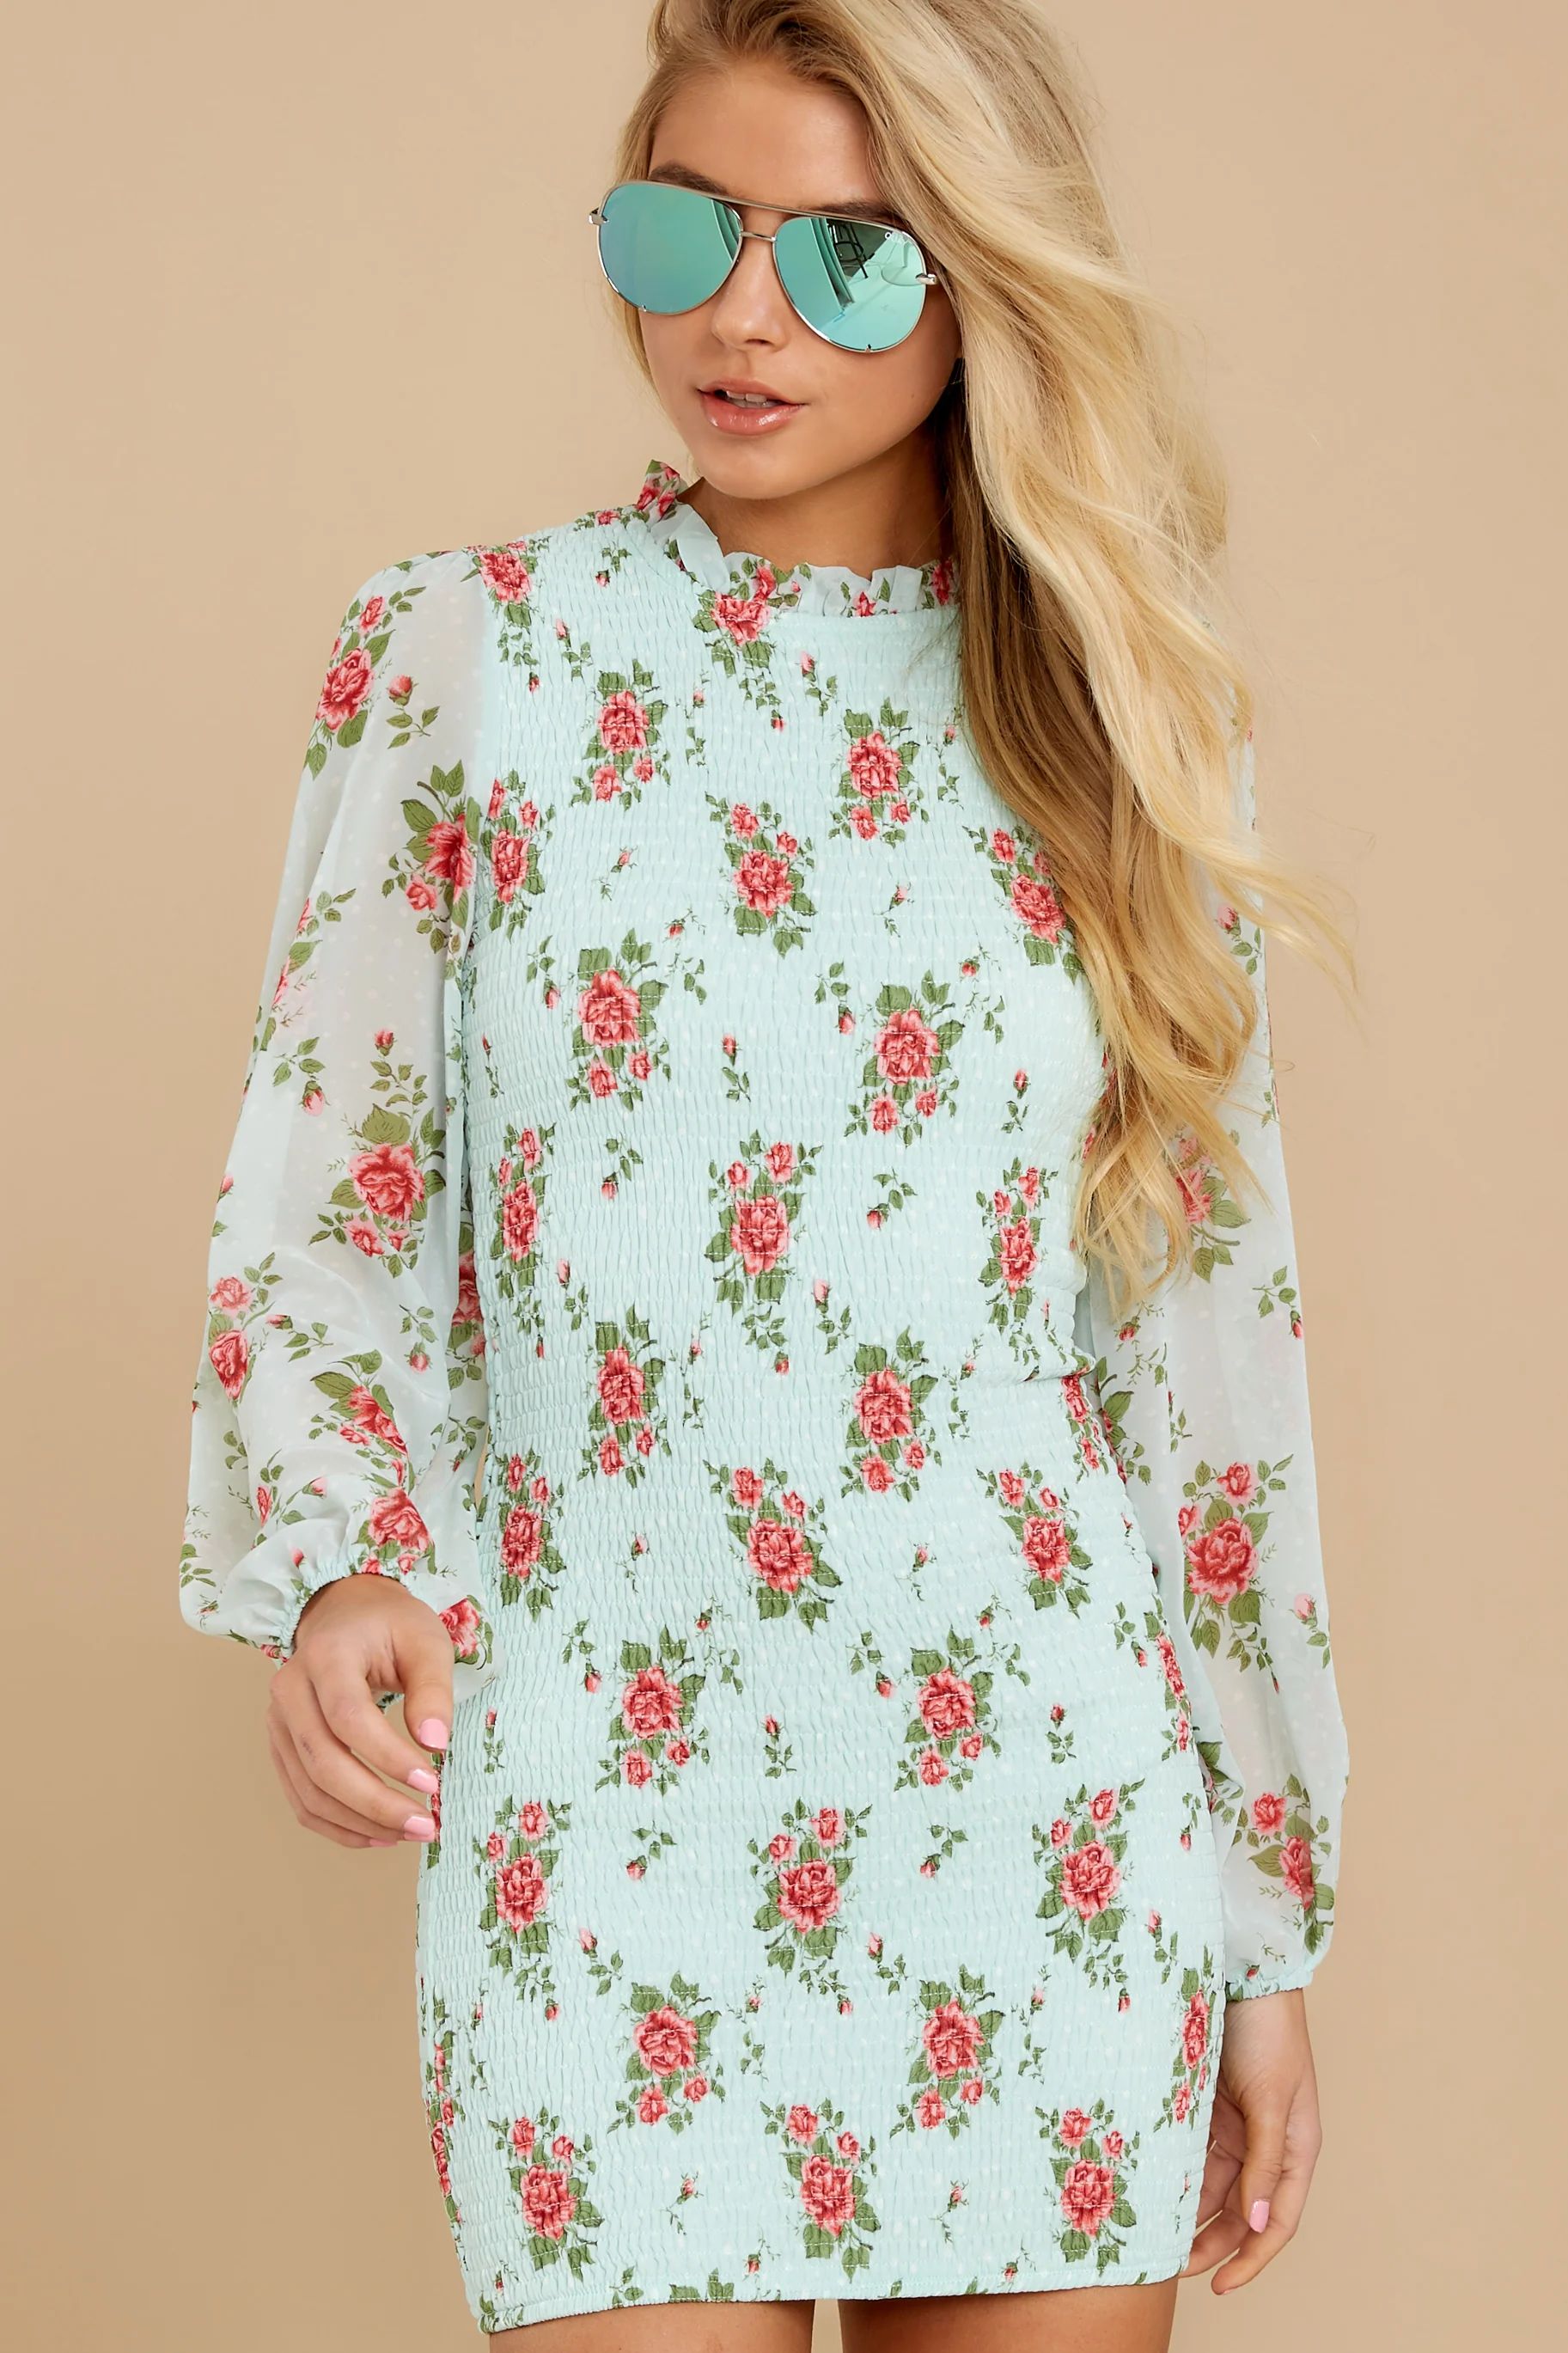 No Greater Love Mint Floral Print Dress | Red Dress 